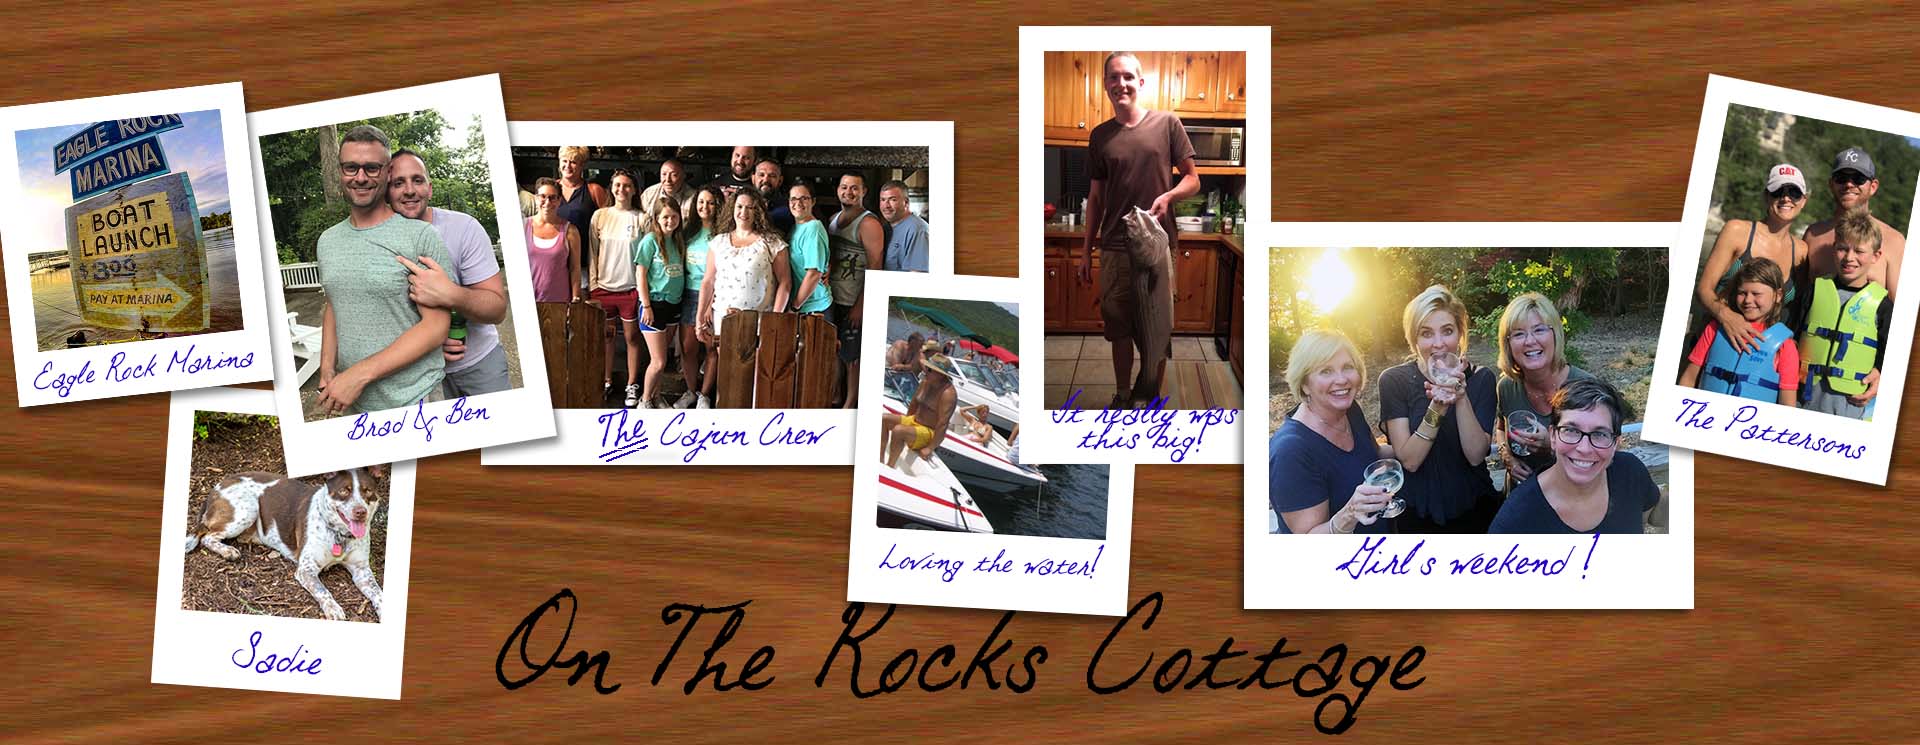 On The Rocks photo gallery header image